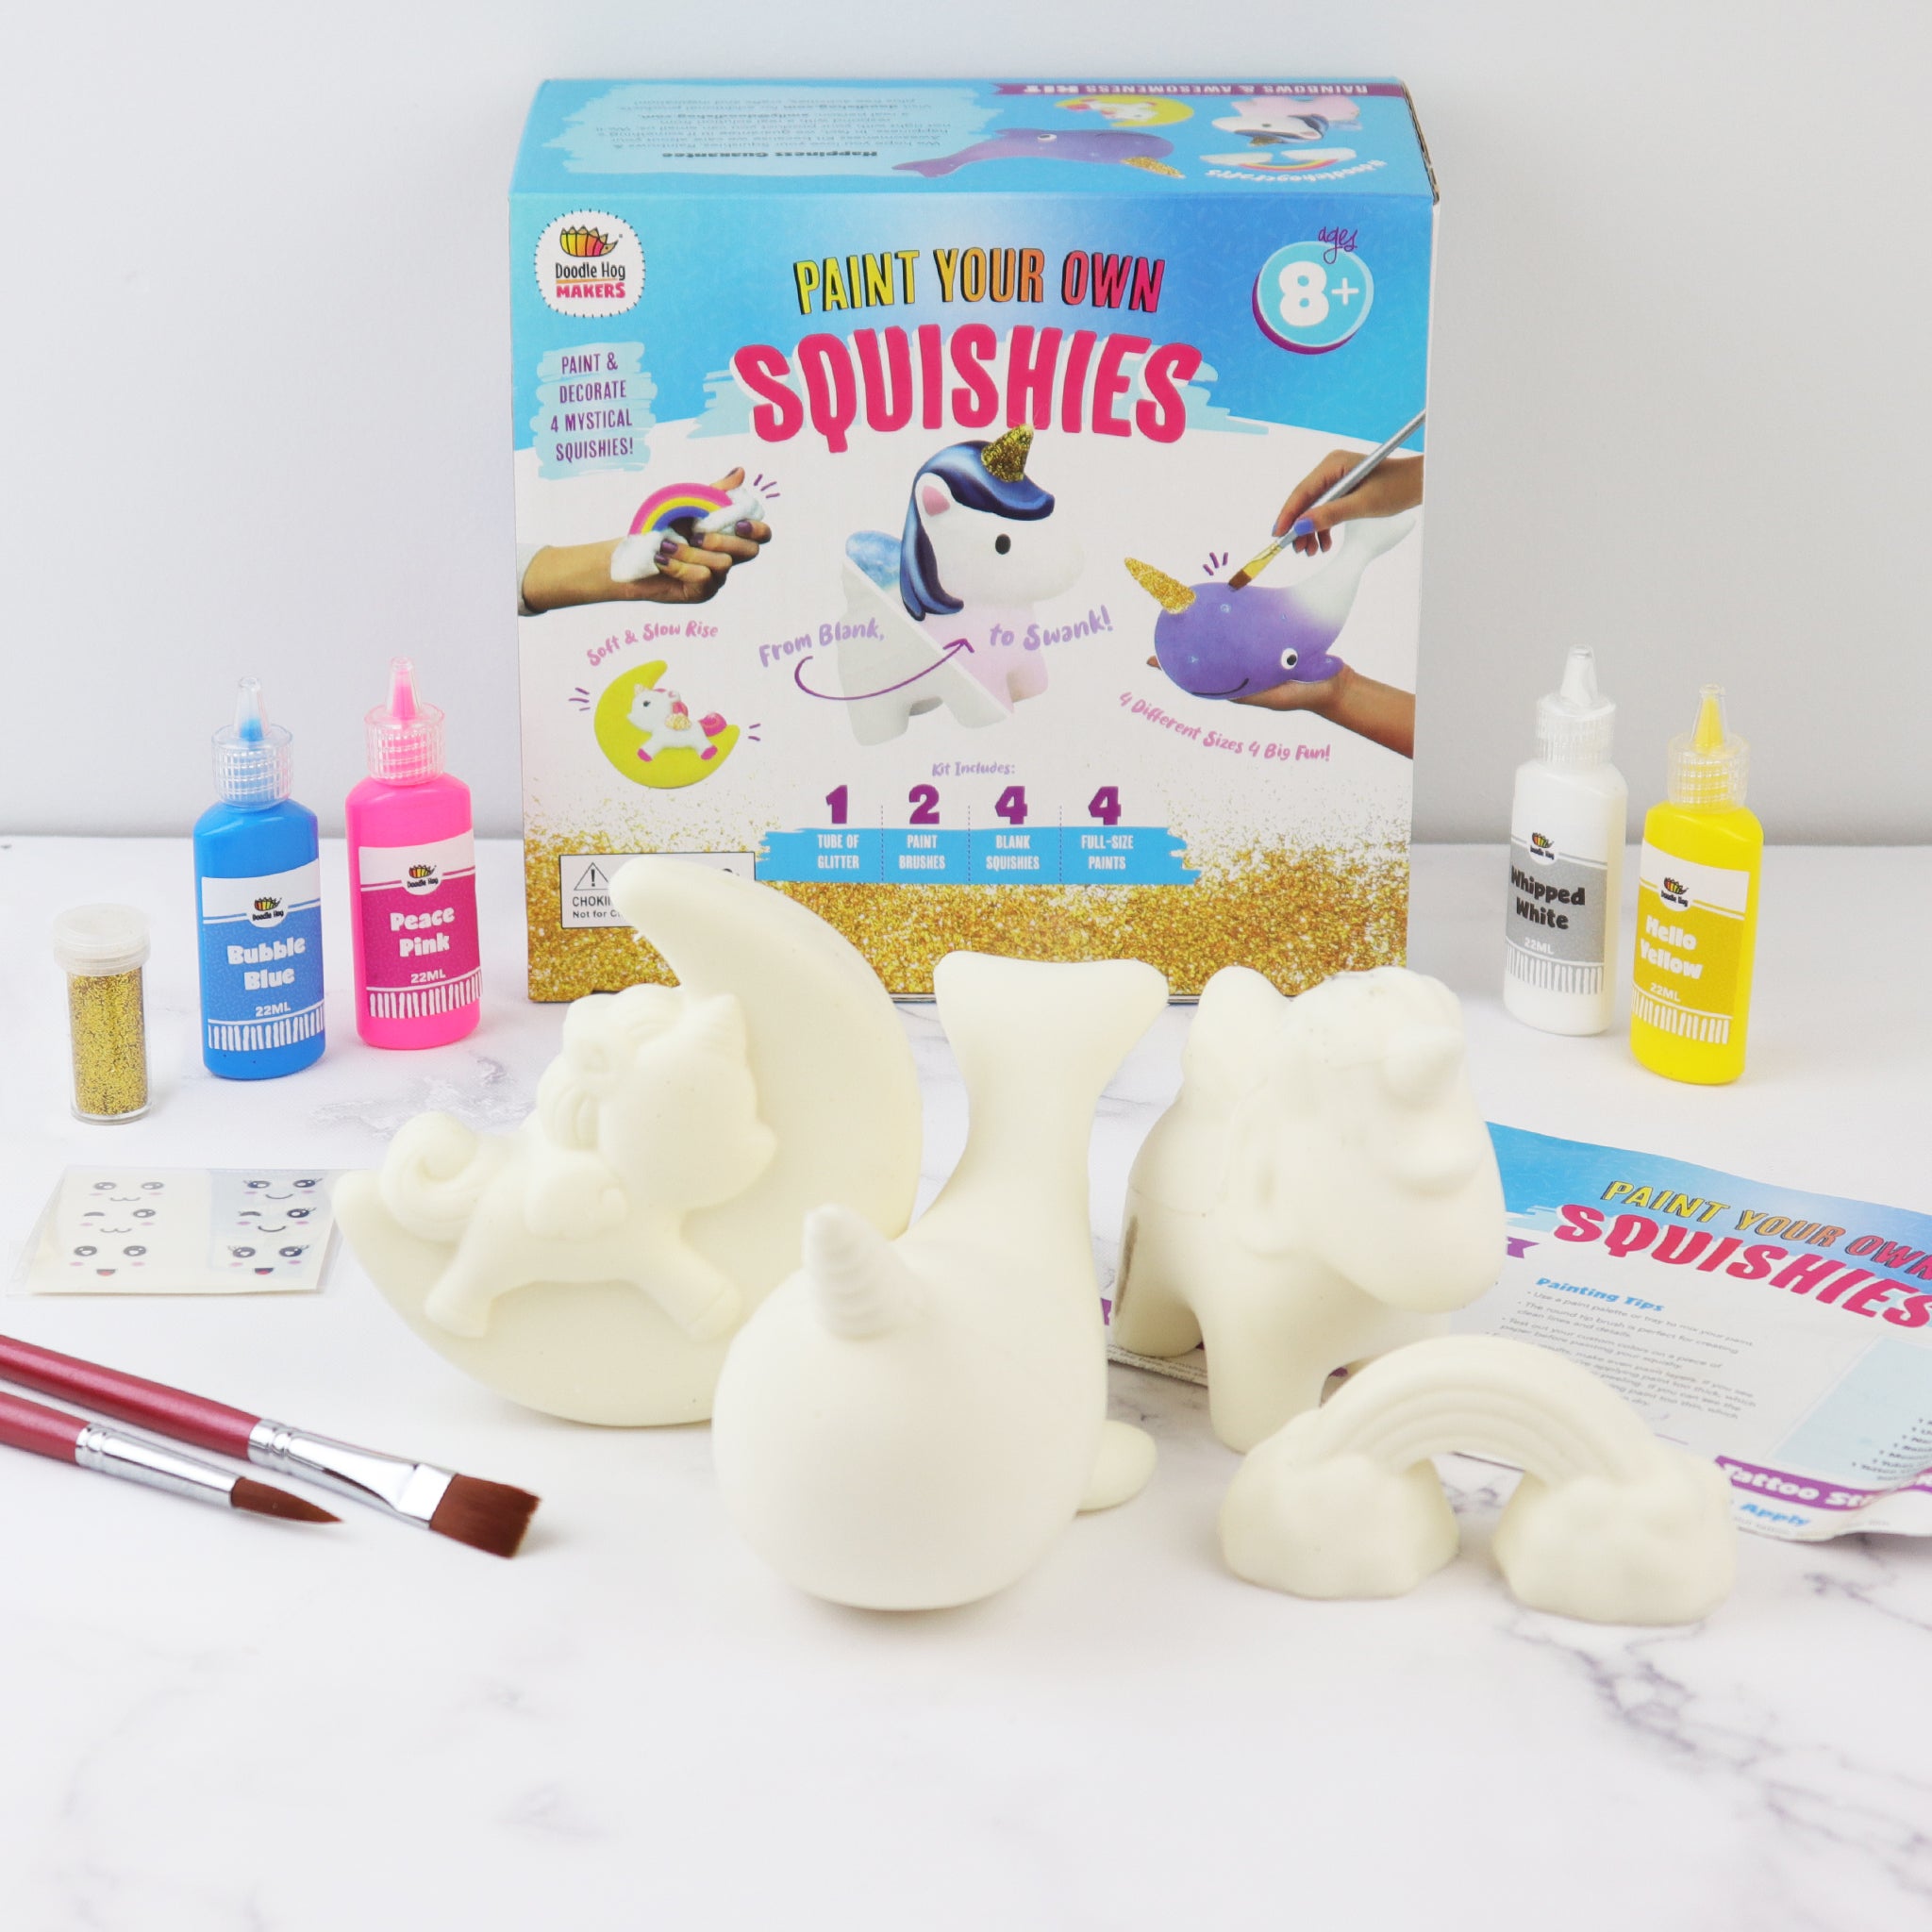 Unicorn Gifts for Girls. Arts & Crafts Paint Your Own Rainbows & Awesomeness Squishies DIY Kit. Gifts for Girls Top Christmas Toys. Includes Large